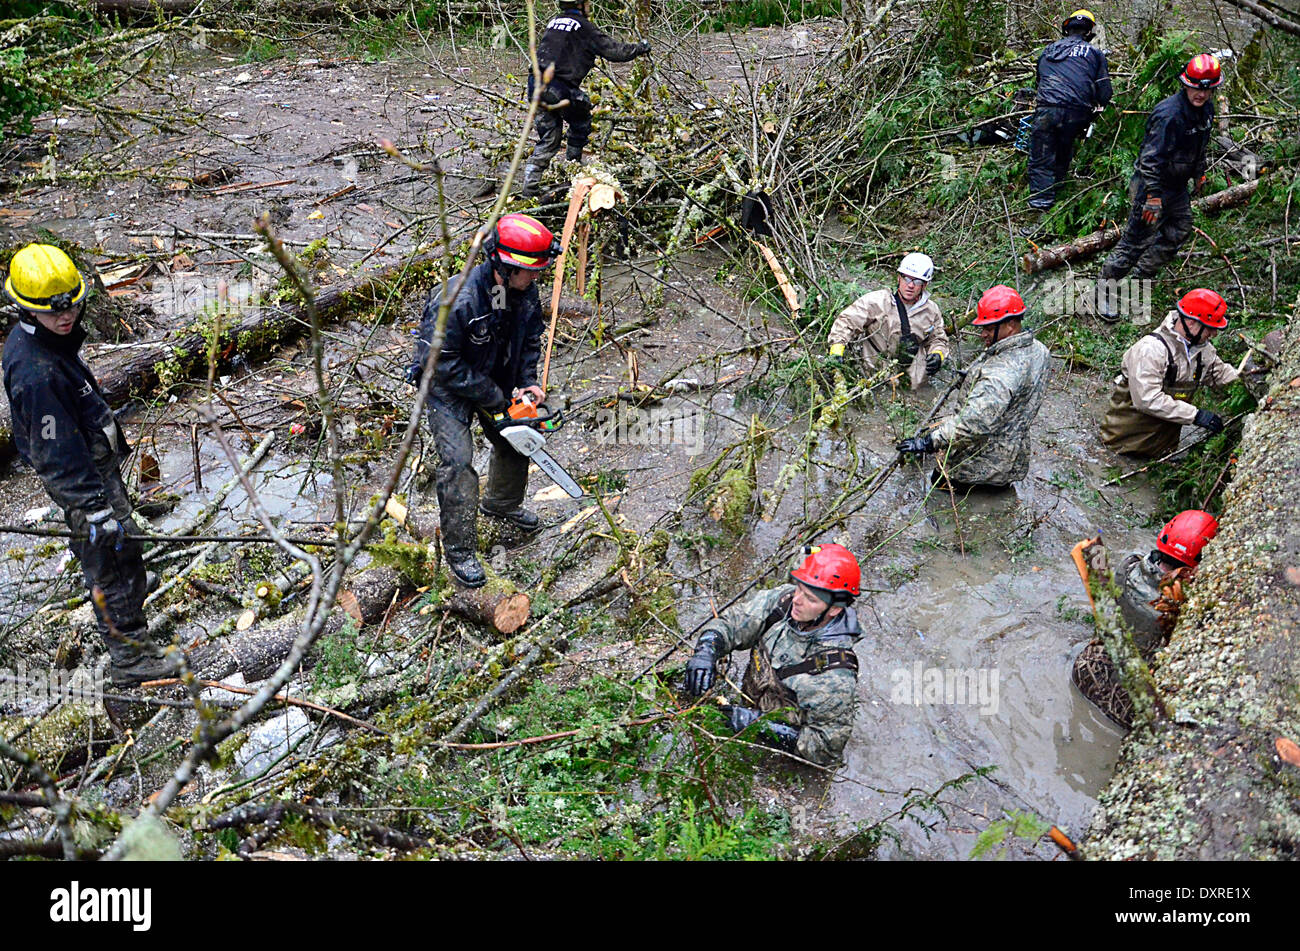 Rescue workers continue efforts to locate victims of a massive landslide that killed at least 28 people and destroyed a small riverside village in northwestern Washington state March 29, 2014 in Oso, Washington. Stock Photo